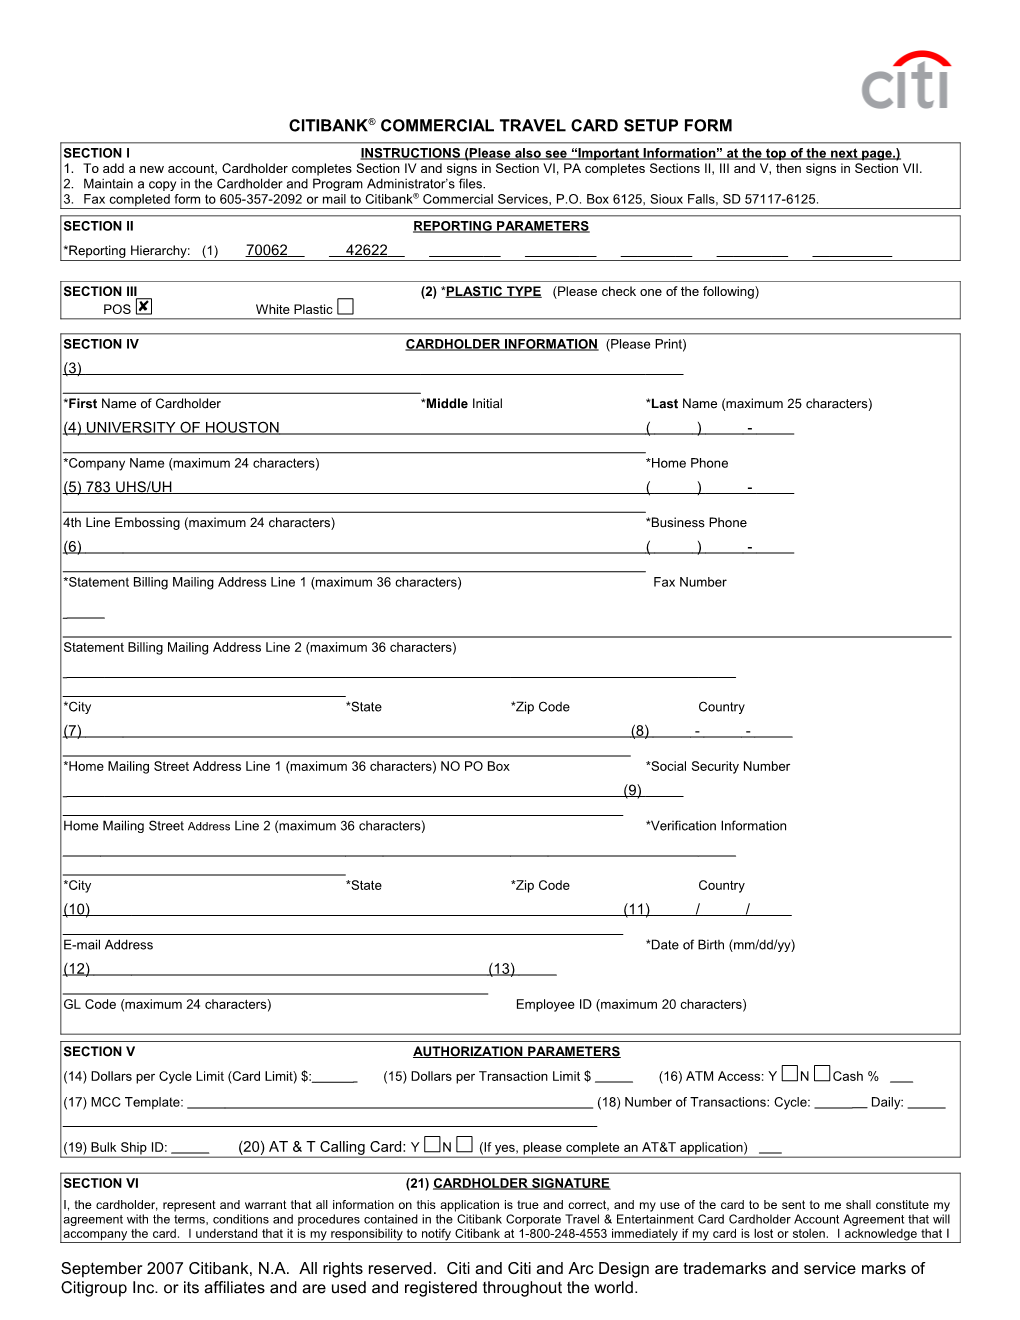 Government Travel Card (Individually Billed Account) Setup Form s1